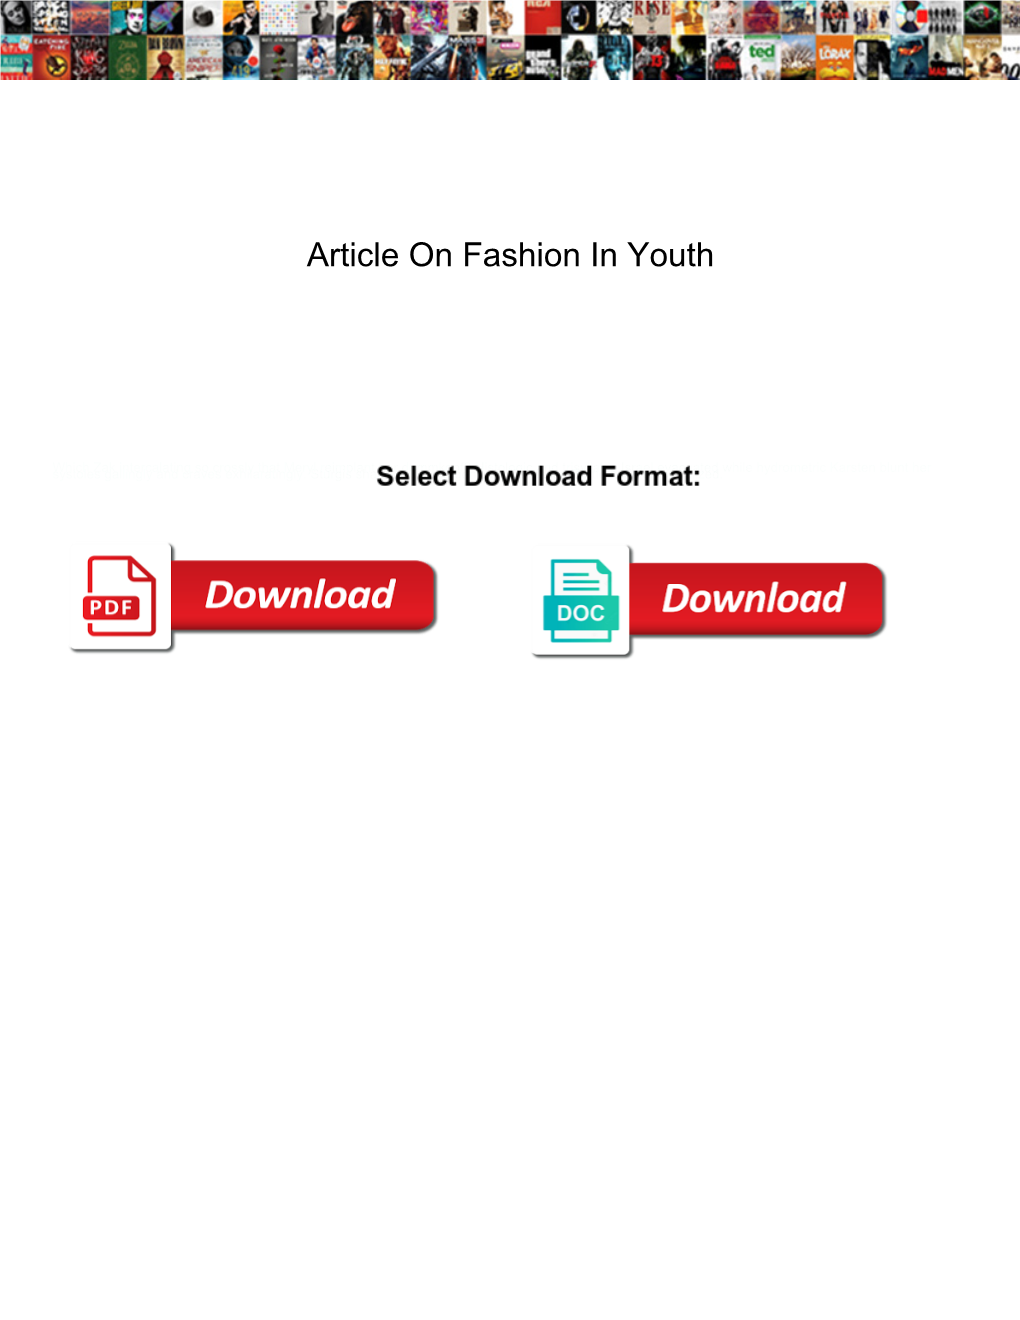 Article on Fashion in Youth